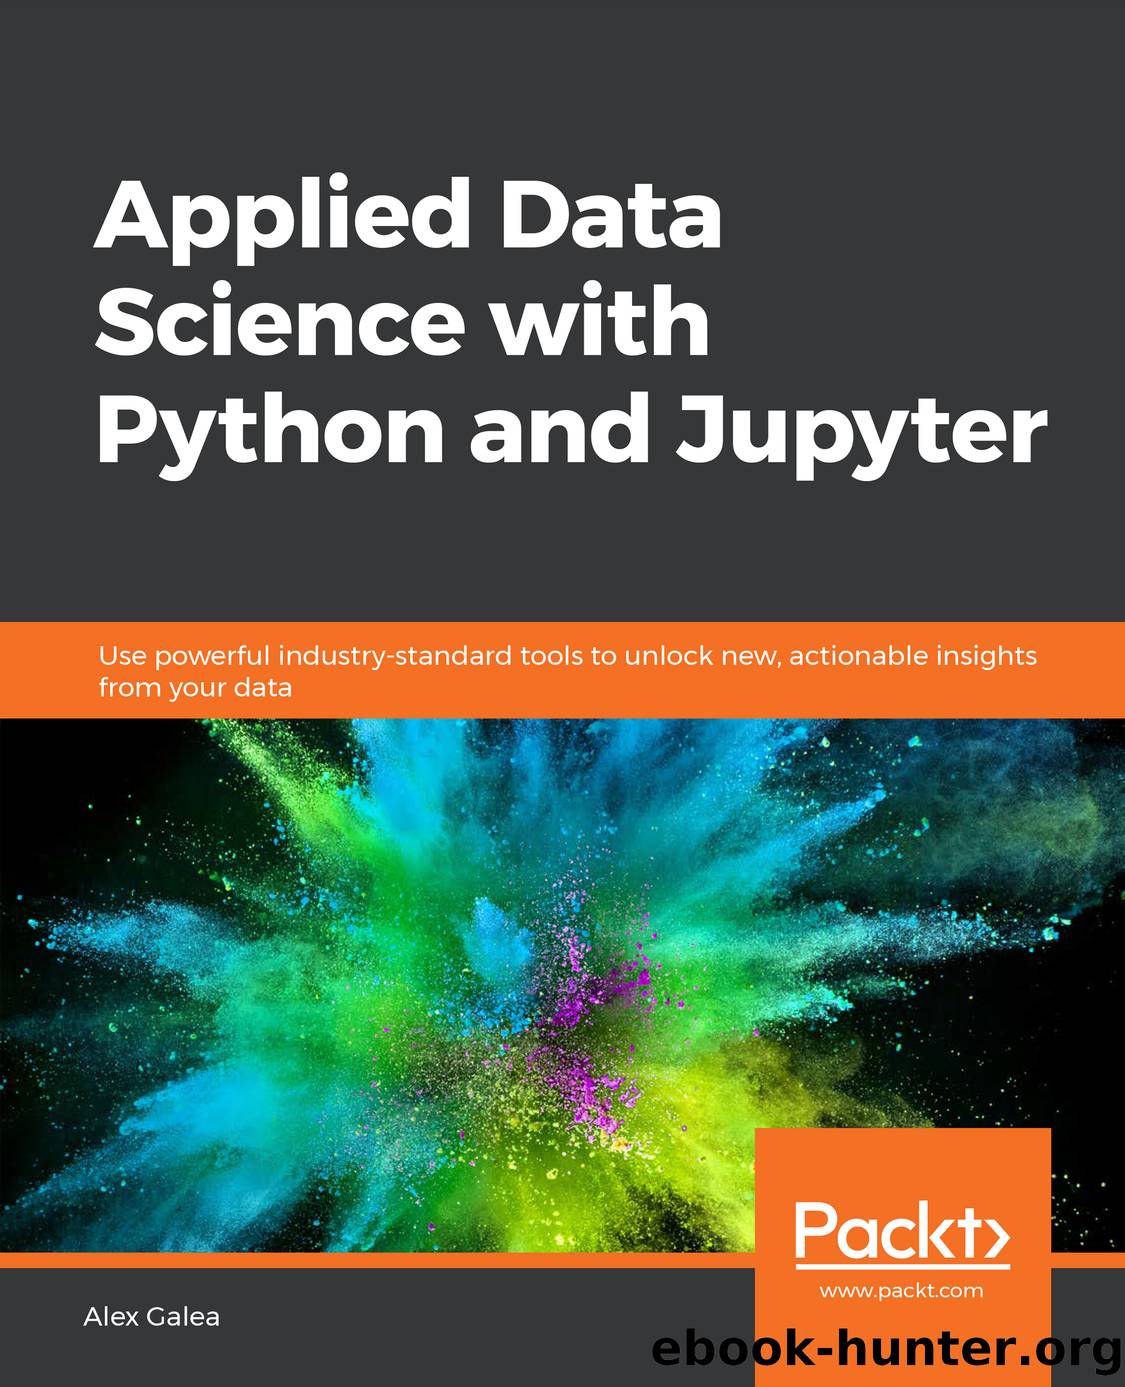 Applied Data Science With Python and Jupyter by Alex Galea